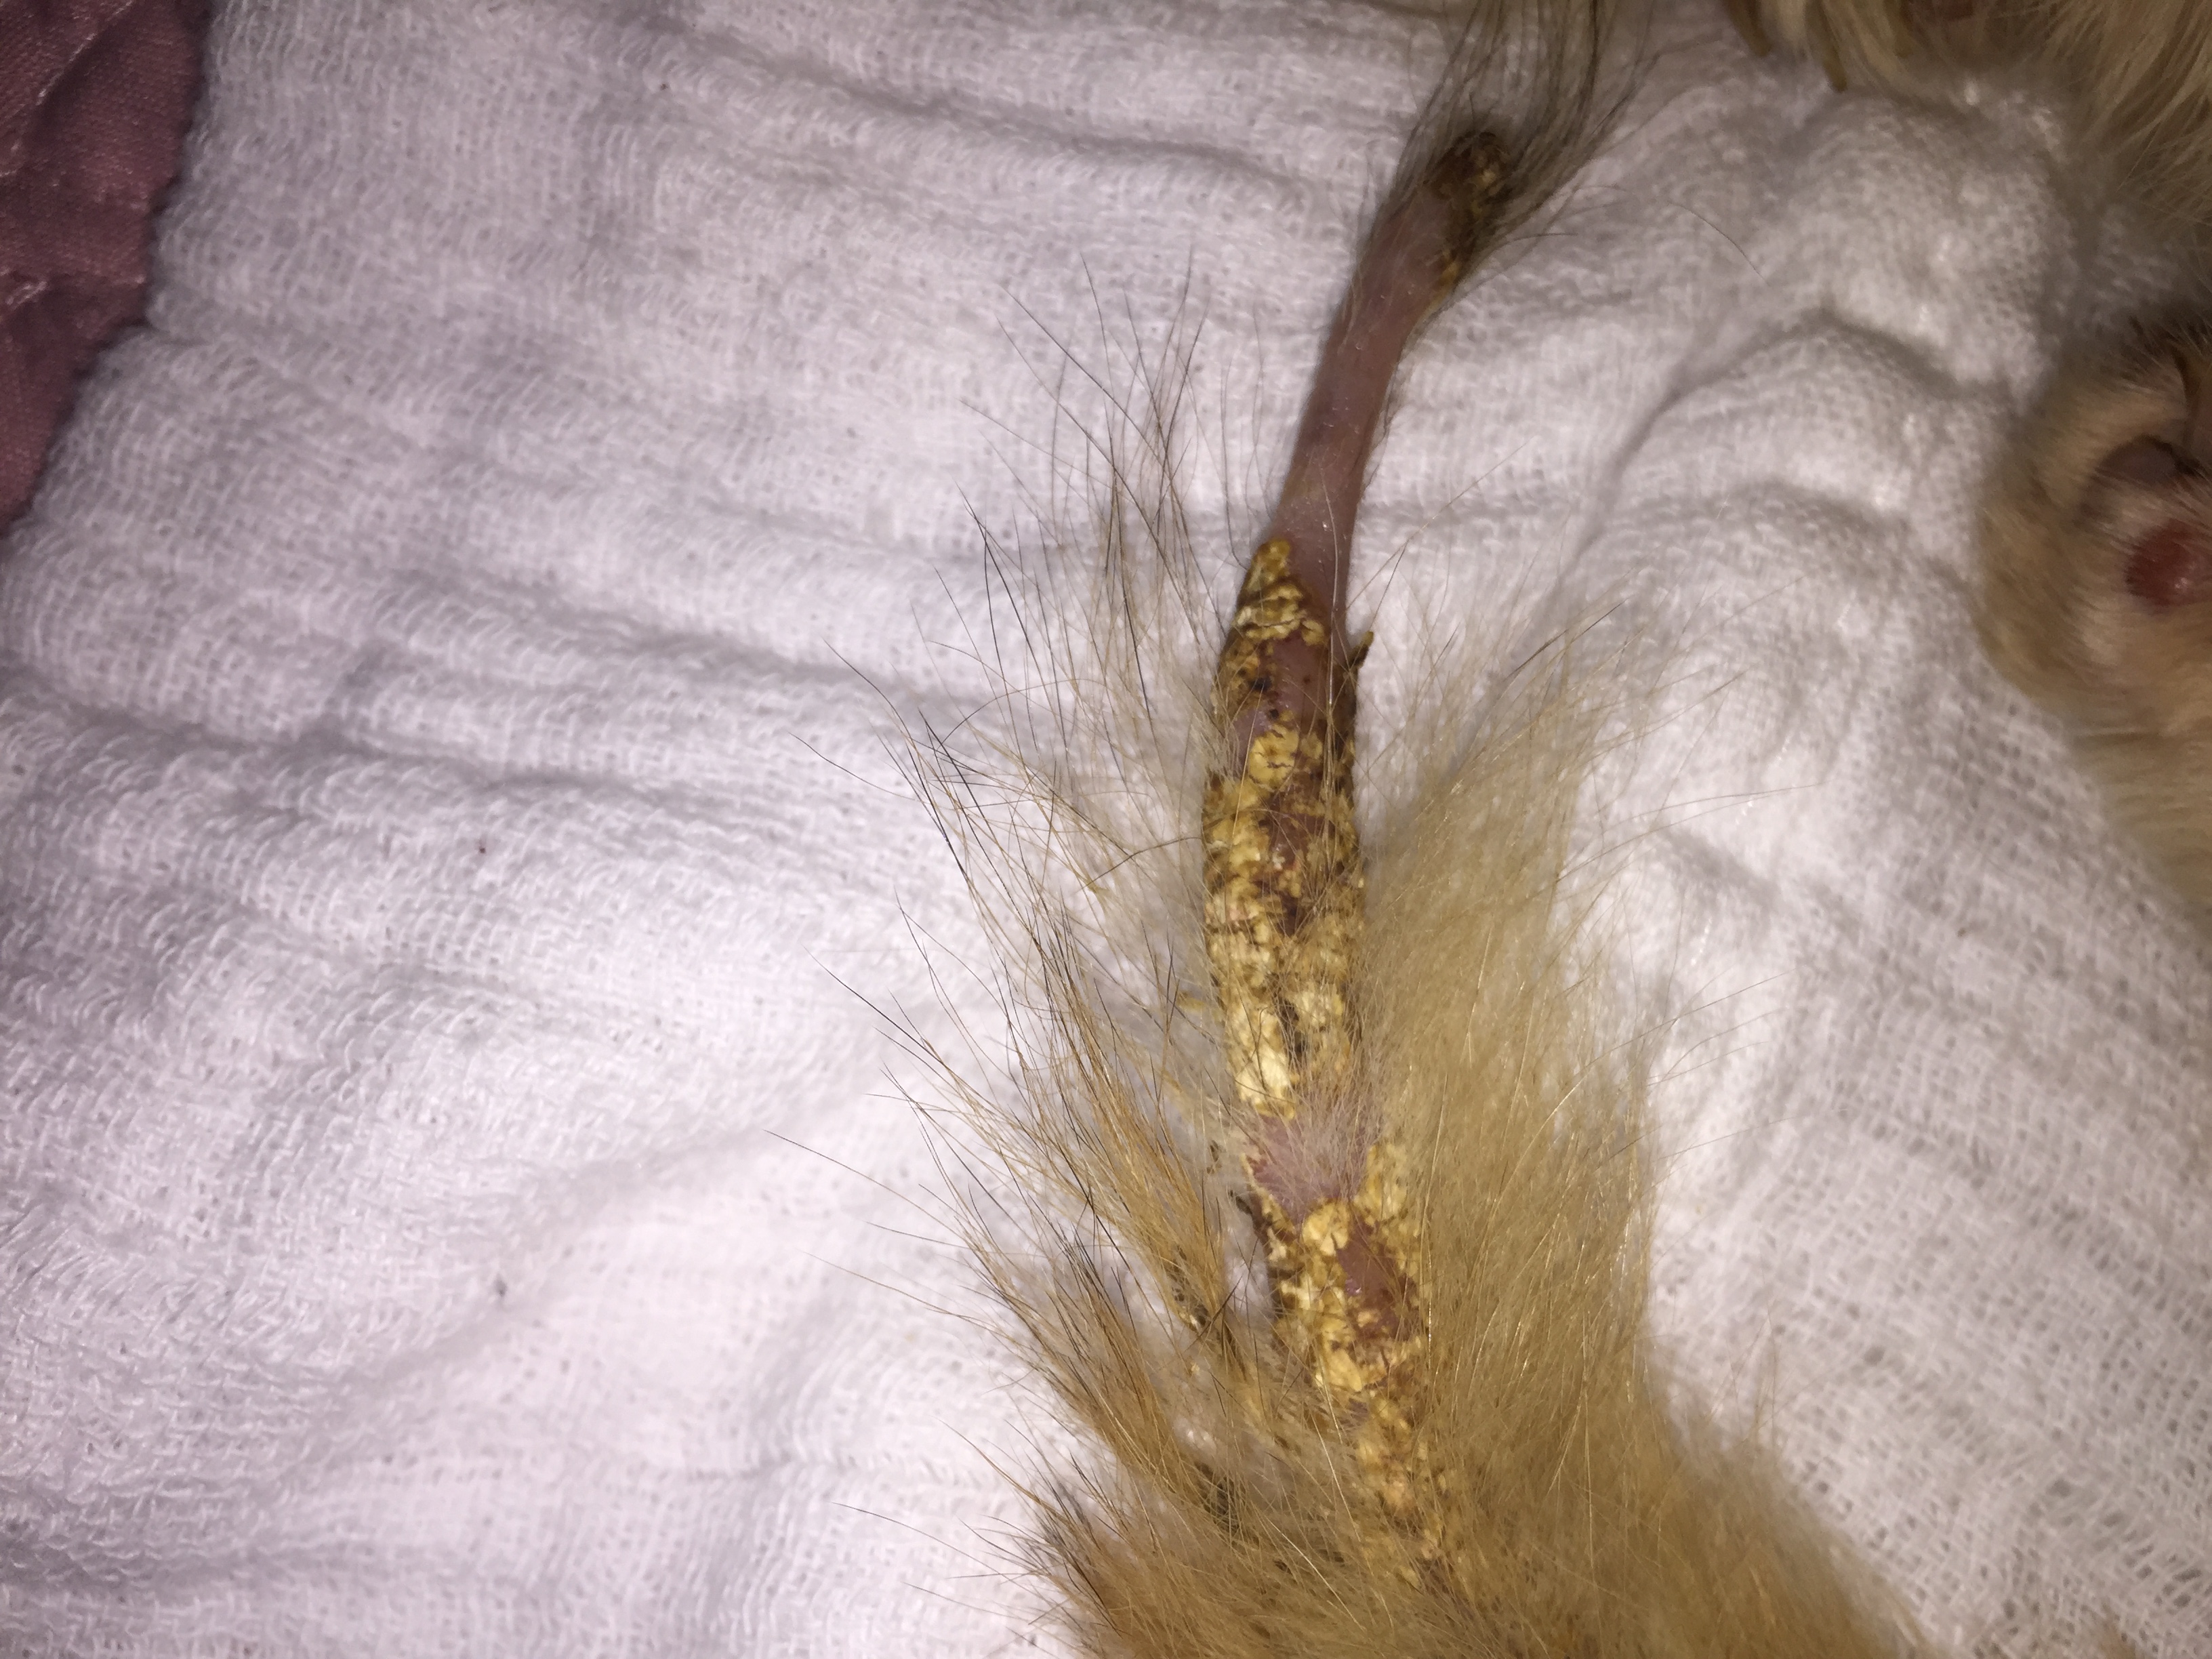 Hairless tail covered in scabs